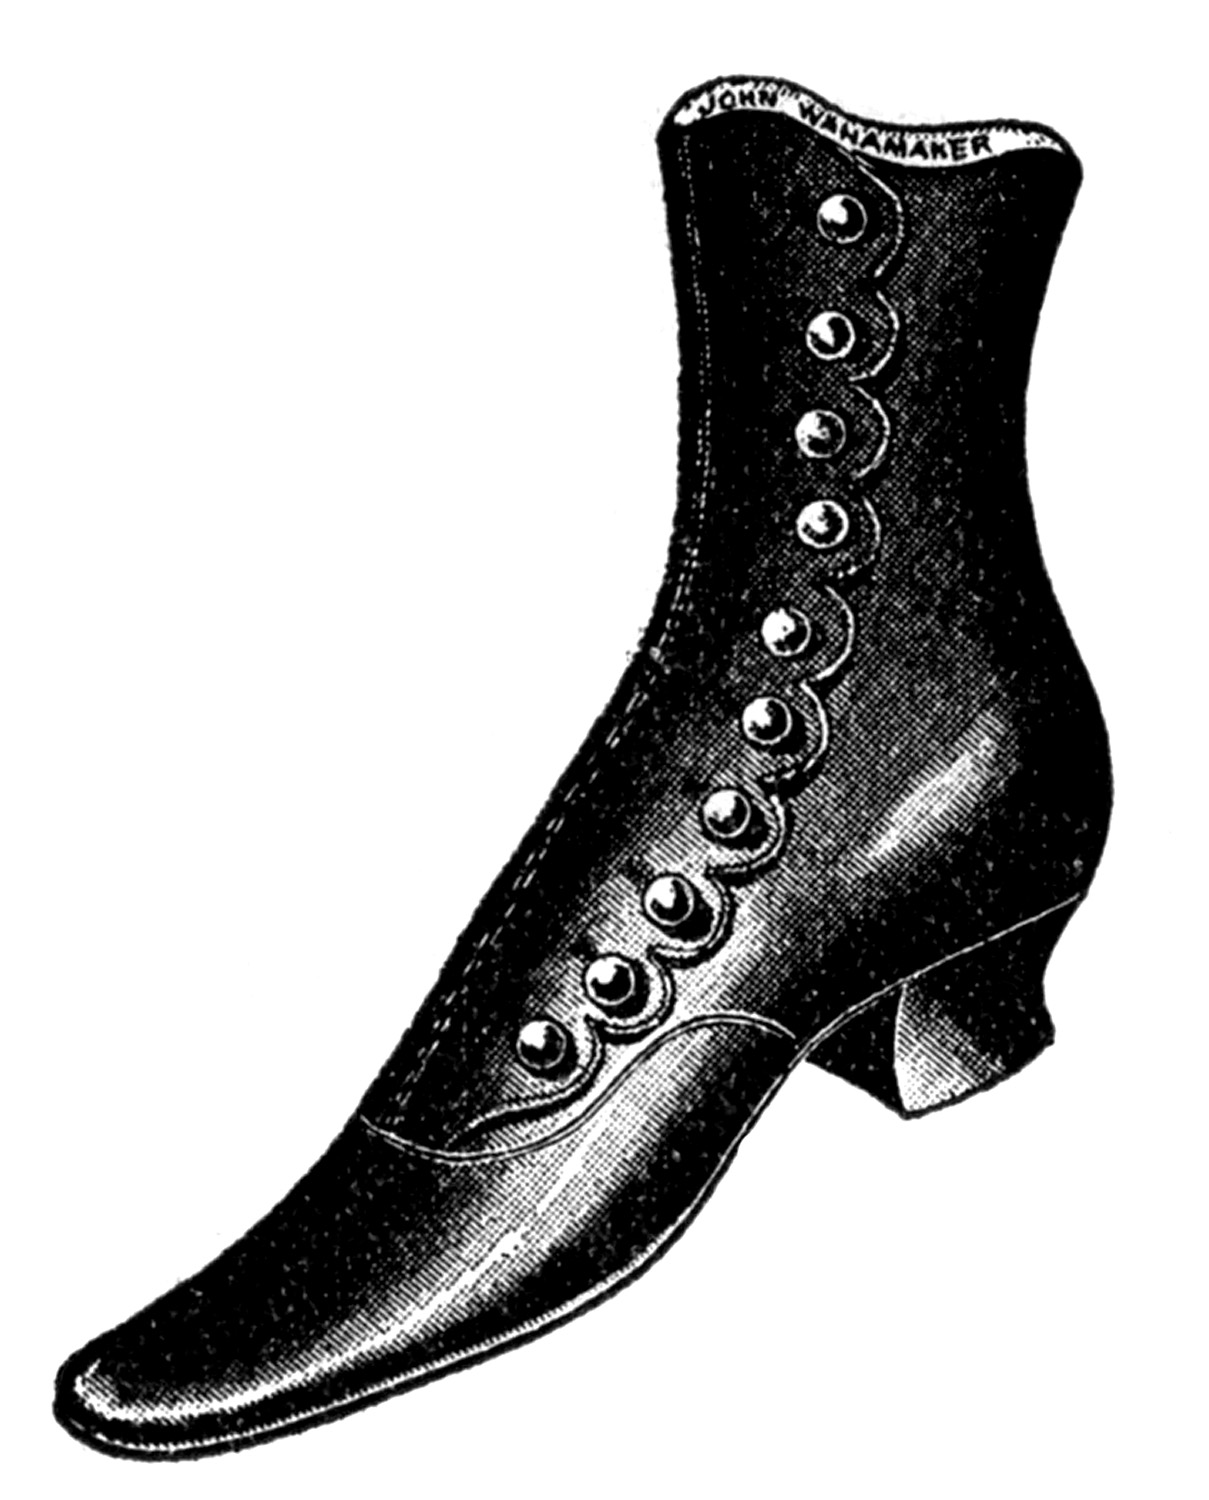 Vintage Clip Art - Ladies Shoes and Boots - The Graphics Fairy